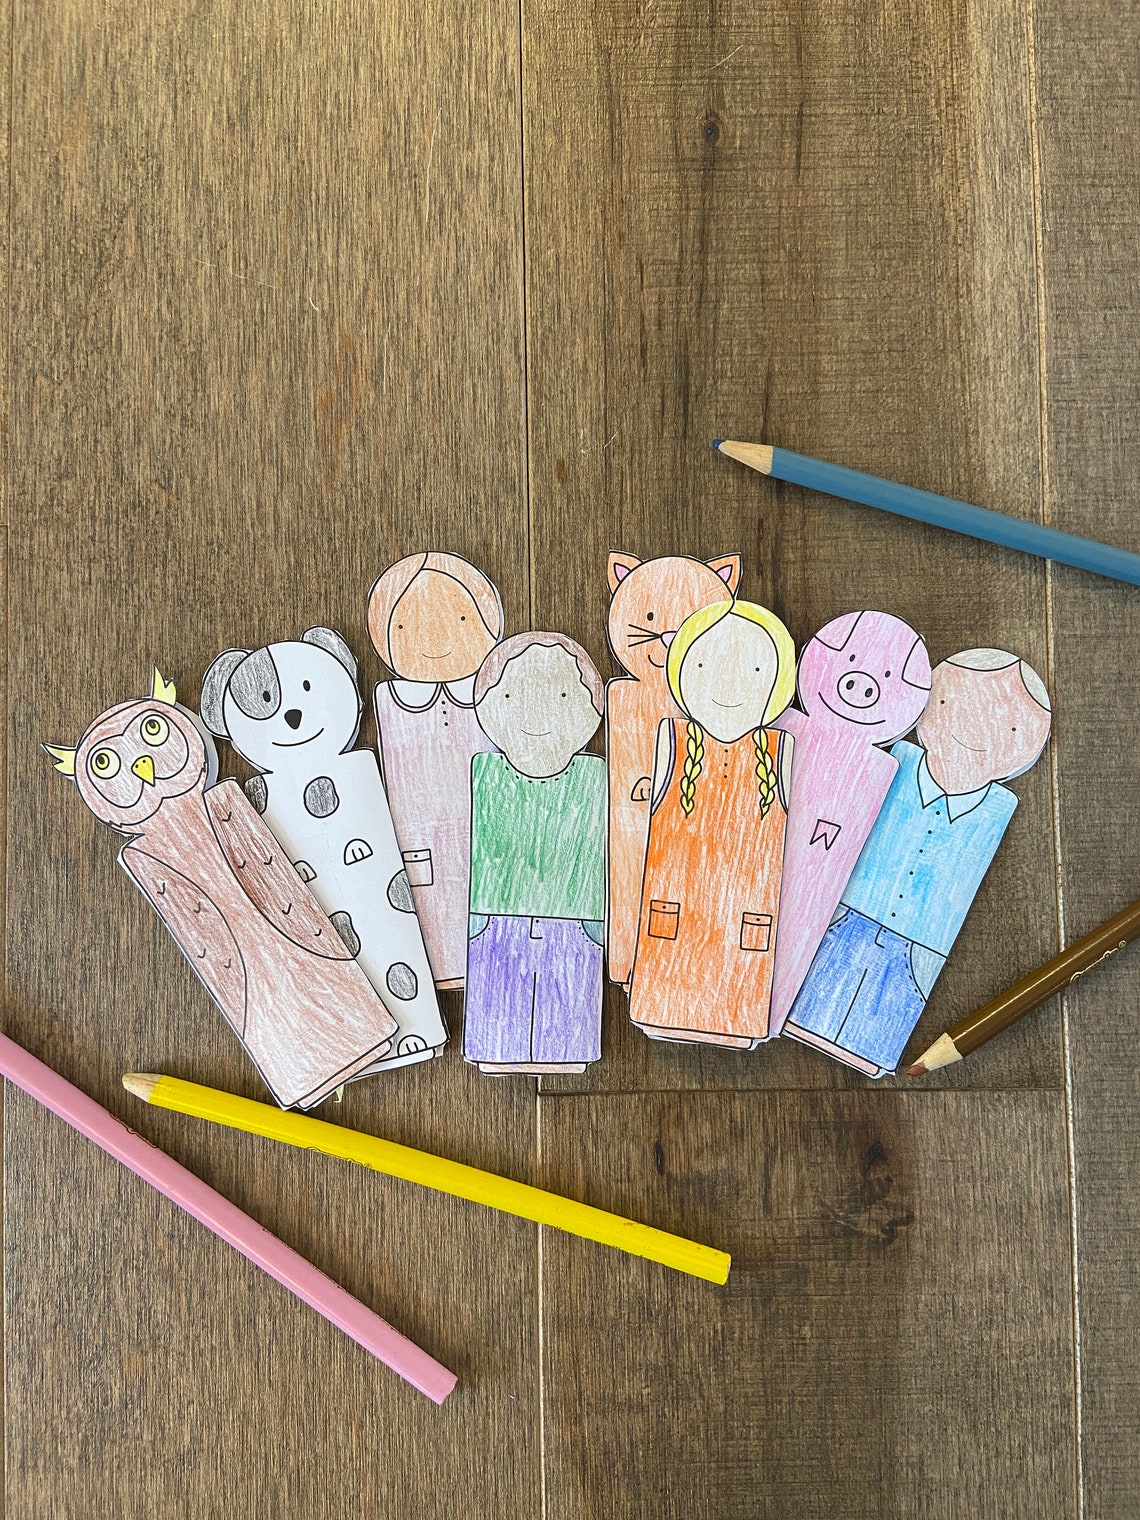 animal-people-family-bible-story-finger-puppets-worksheet-etsy